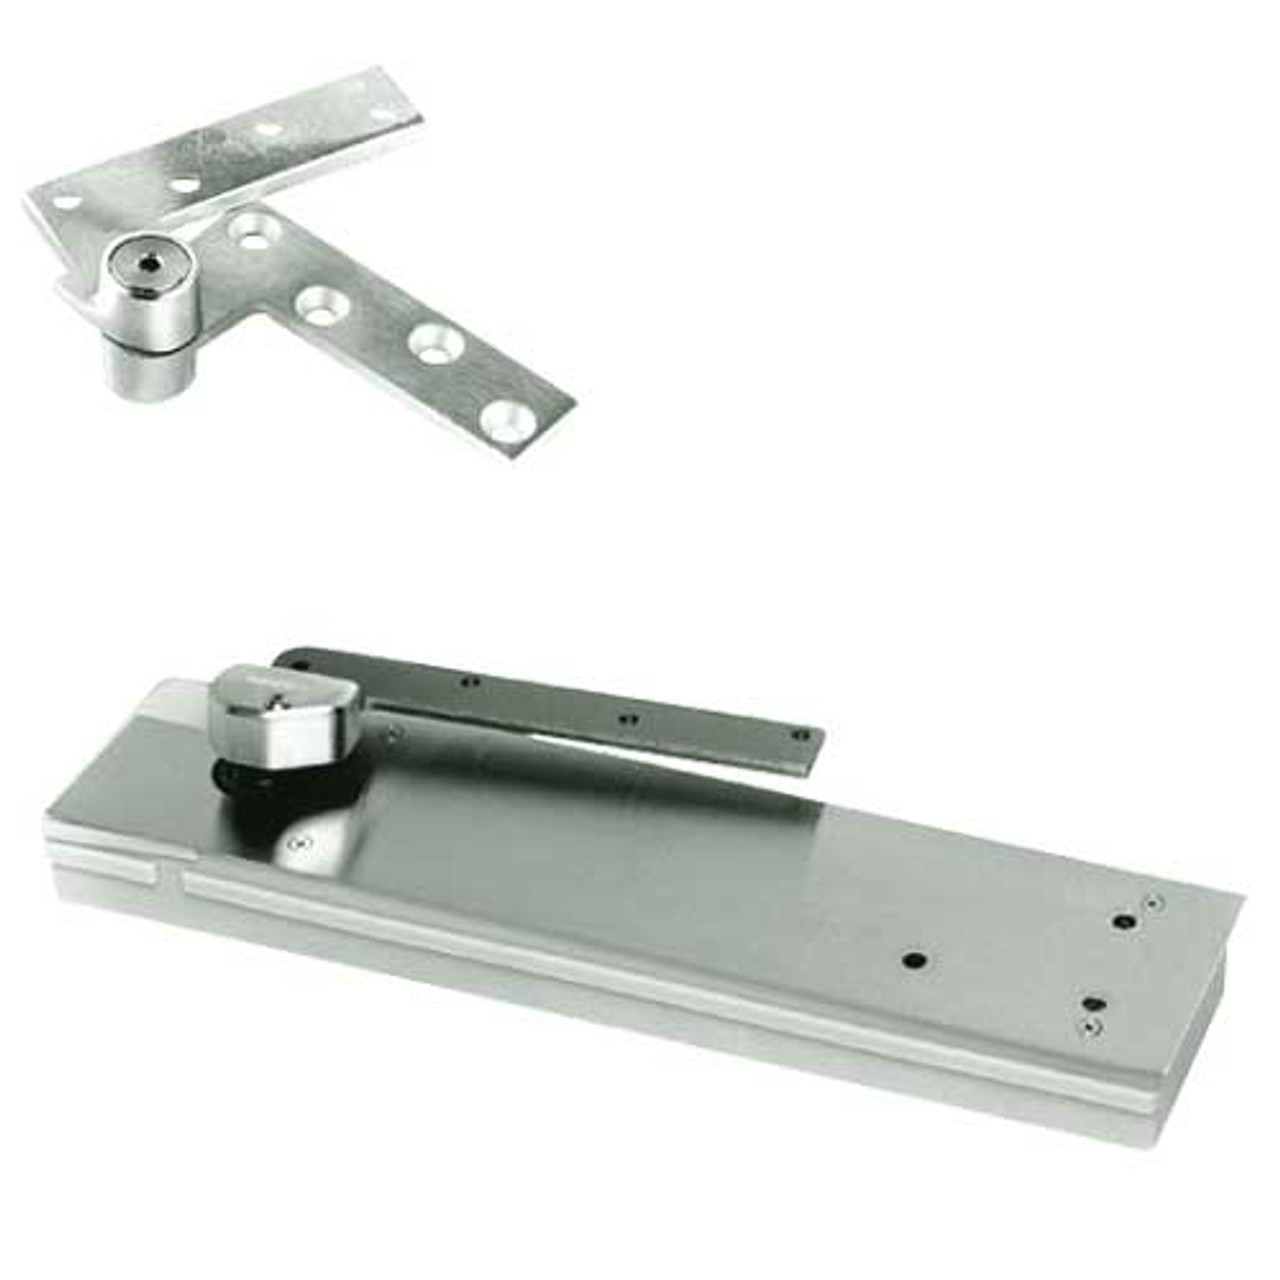 5103ABC105-SC-RH-618 Rixson 51 Series 3/4" Offset Hung Shallow Depth Floor Closers in Bright Nickel Finish